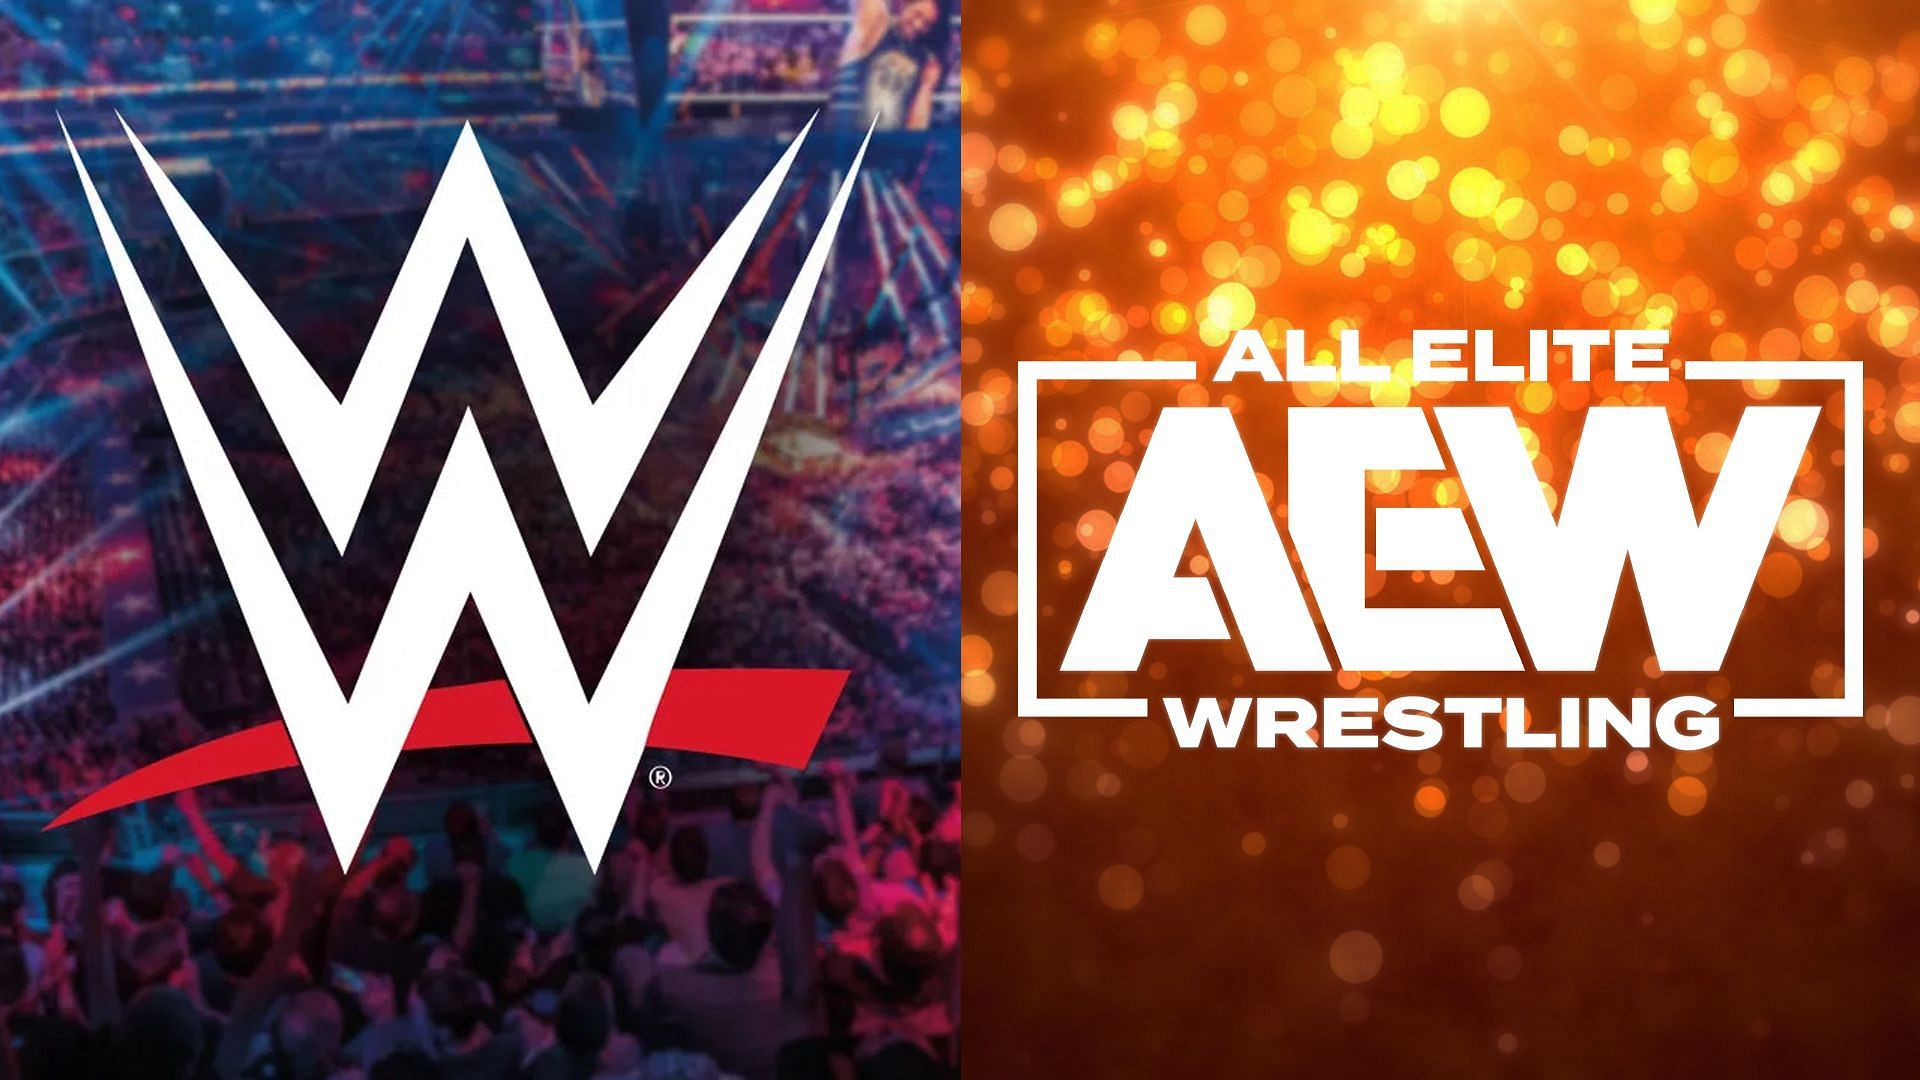 AEW has many former WWE Superstars on its roster